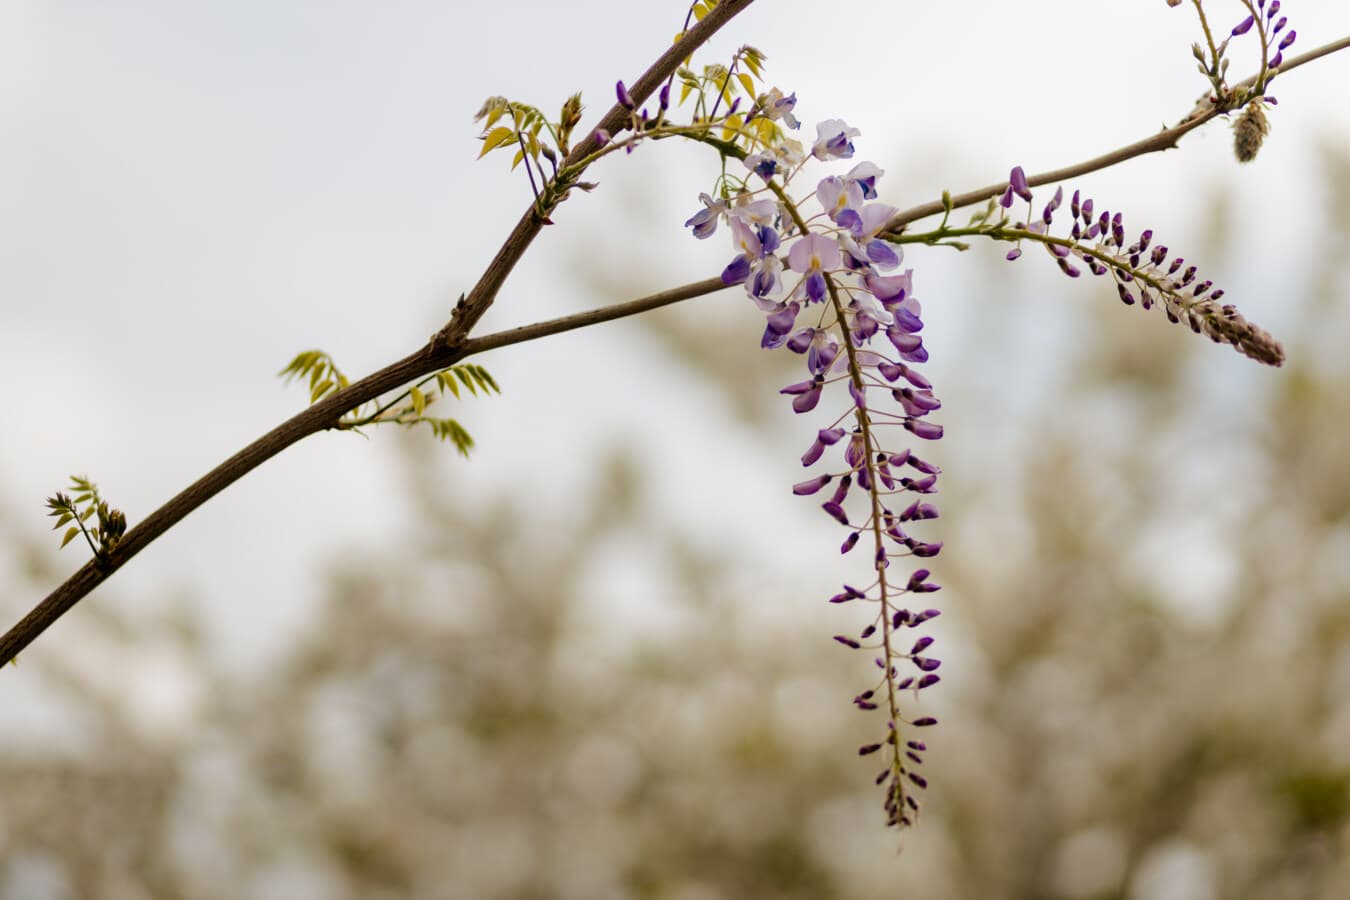 flowers, purple, pinkish, acacia, flower, nature, branch, leaf, color, tree